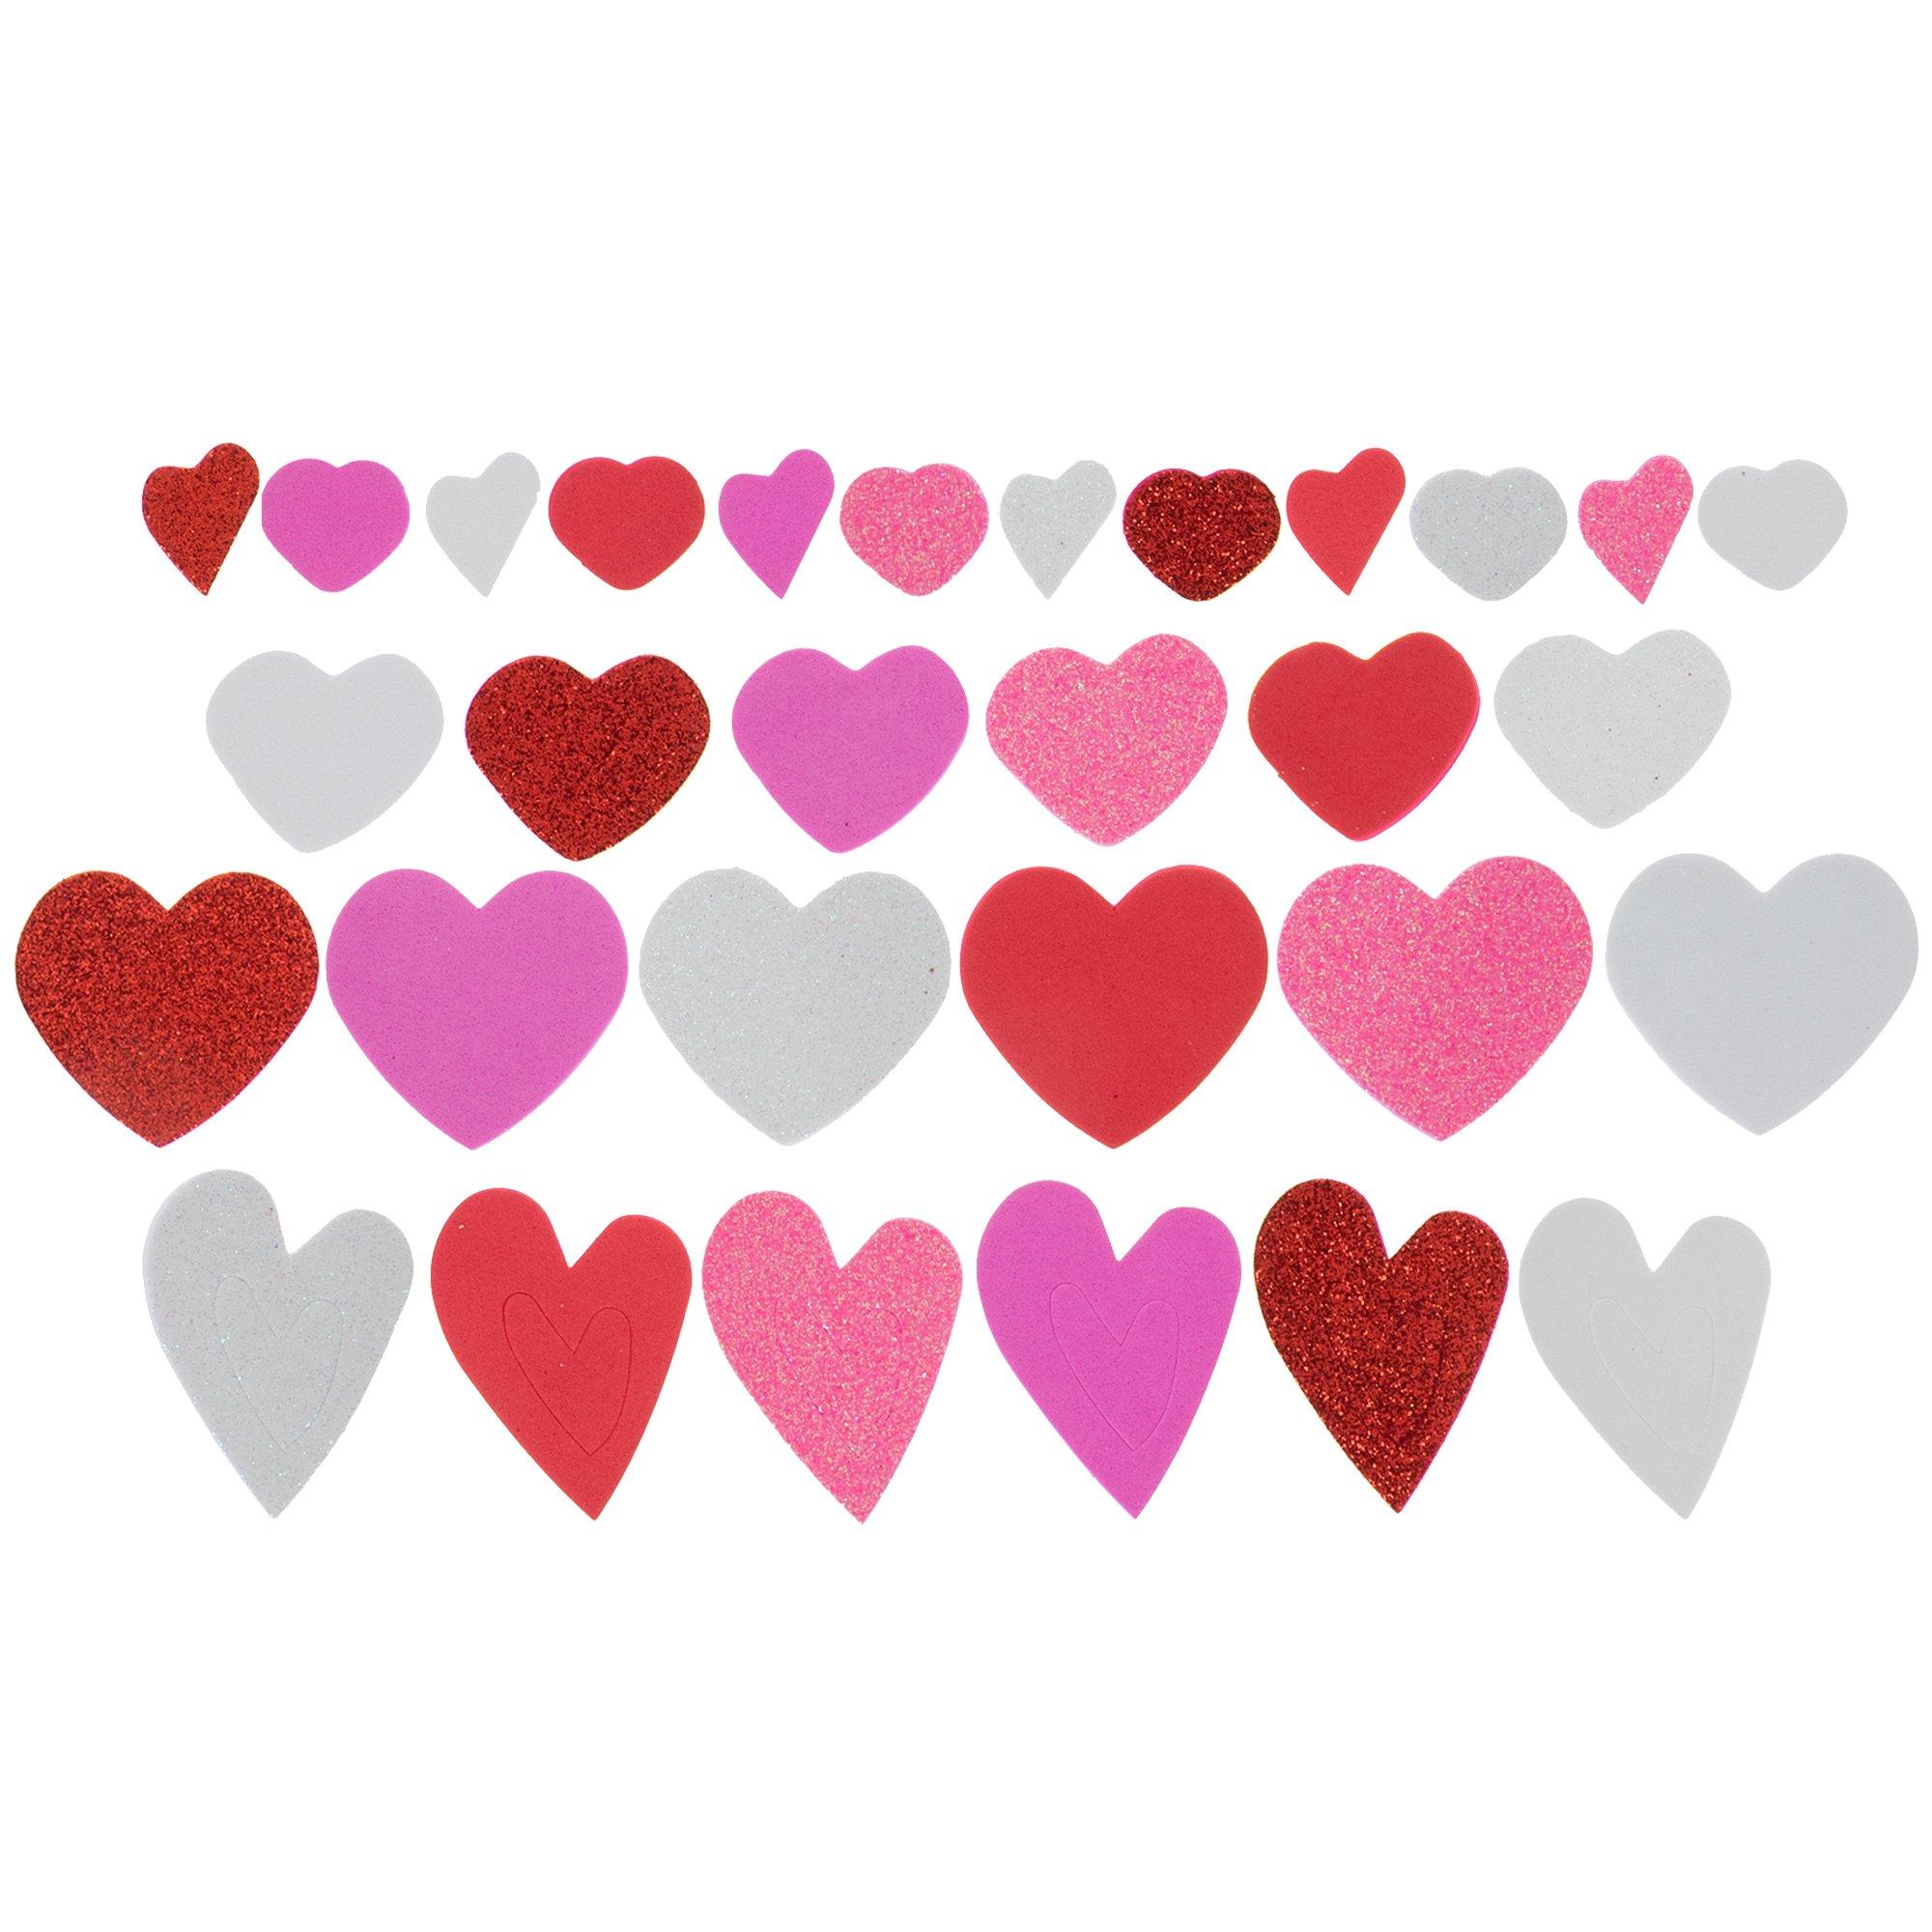 Glitter Heart Stickers Sheets - 12 Count: Rebecca's Toys & Prizes